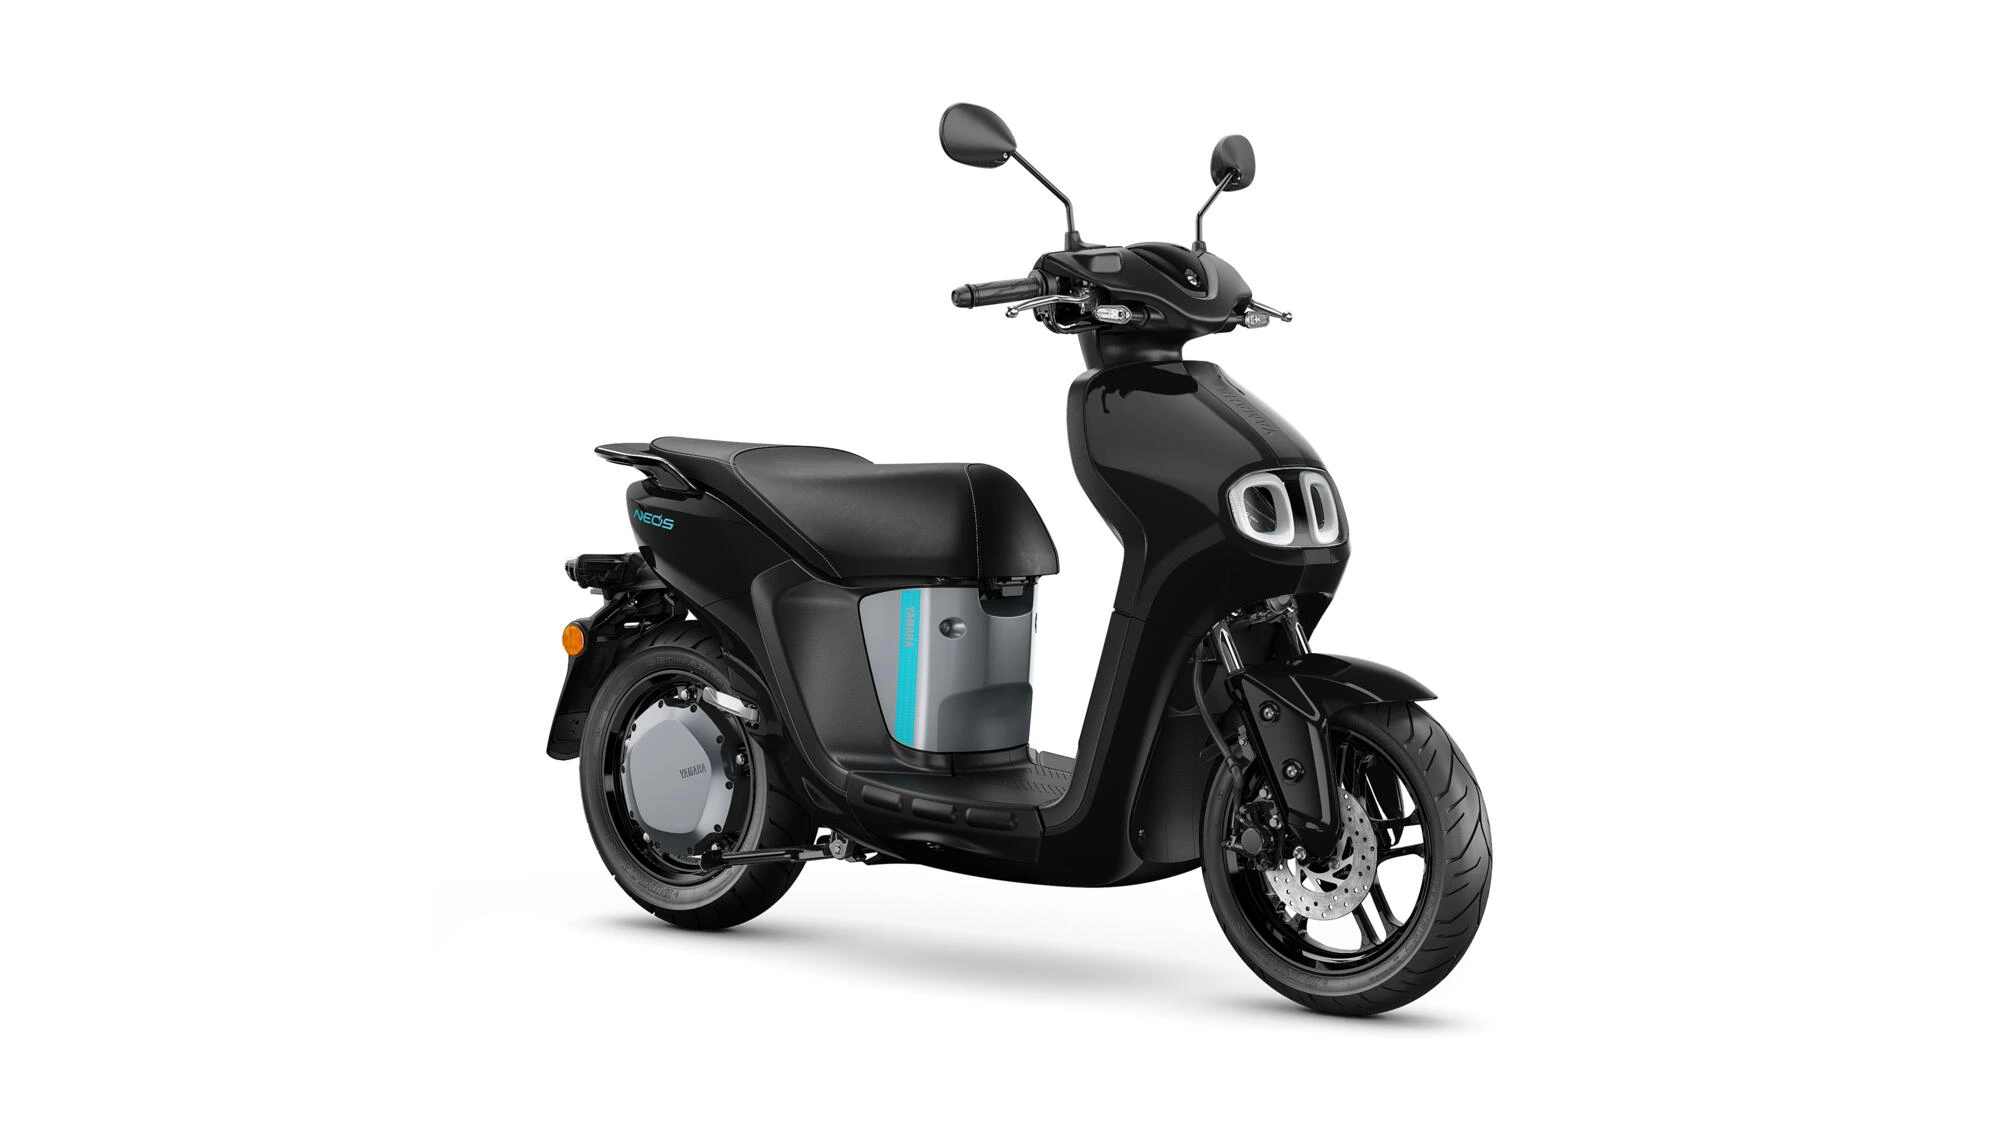 Yamaha NEO S STD with Black color